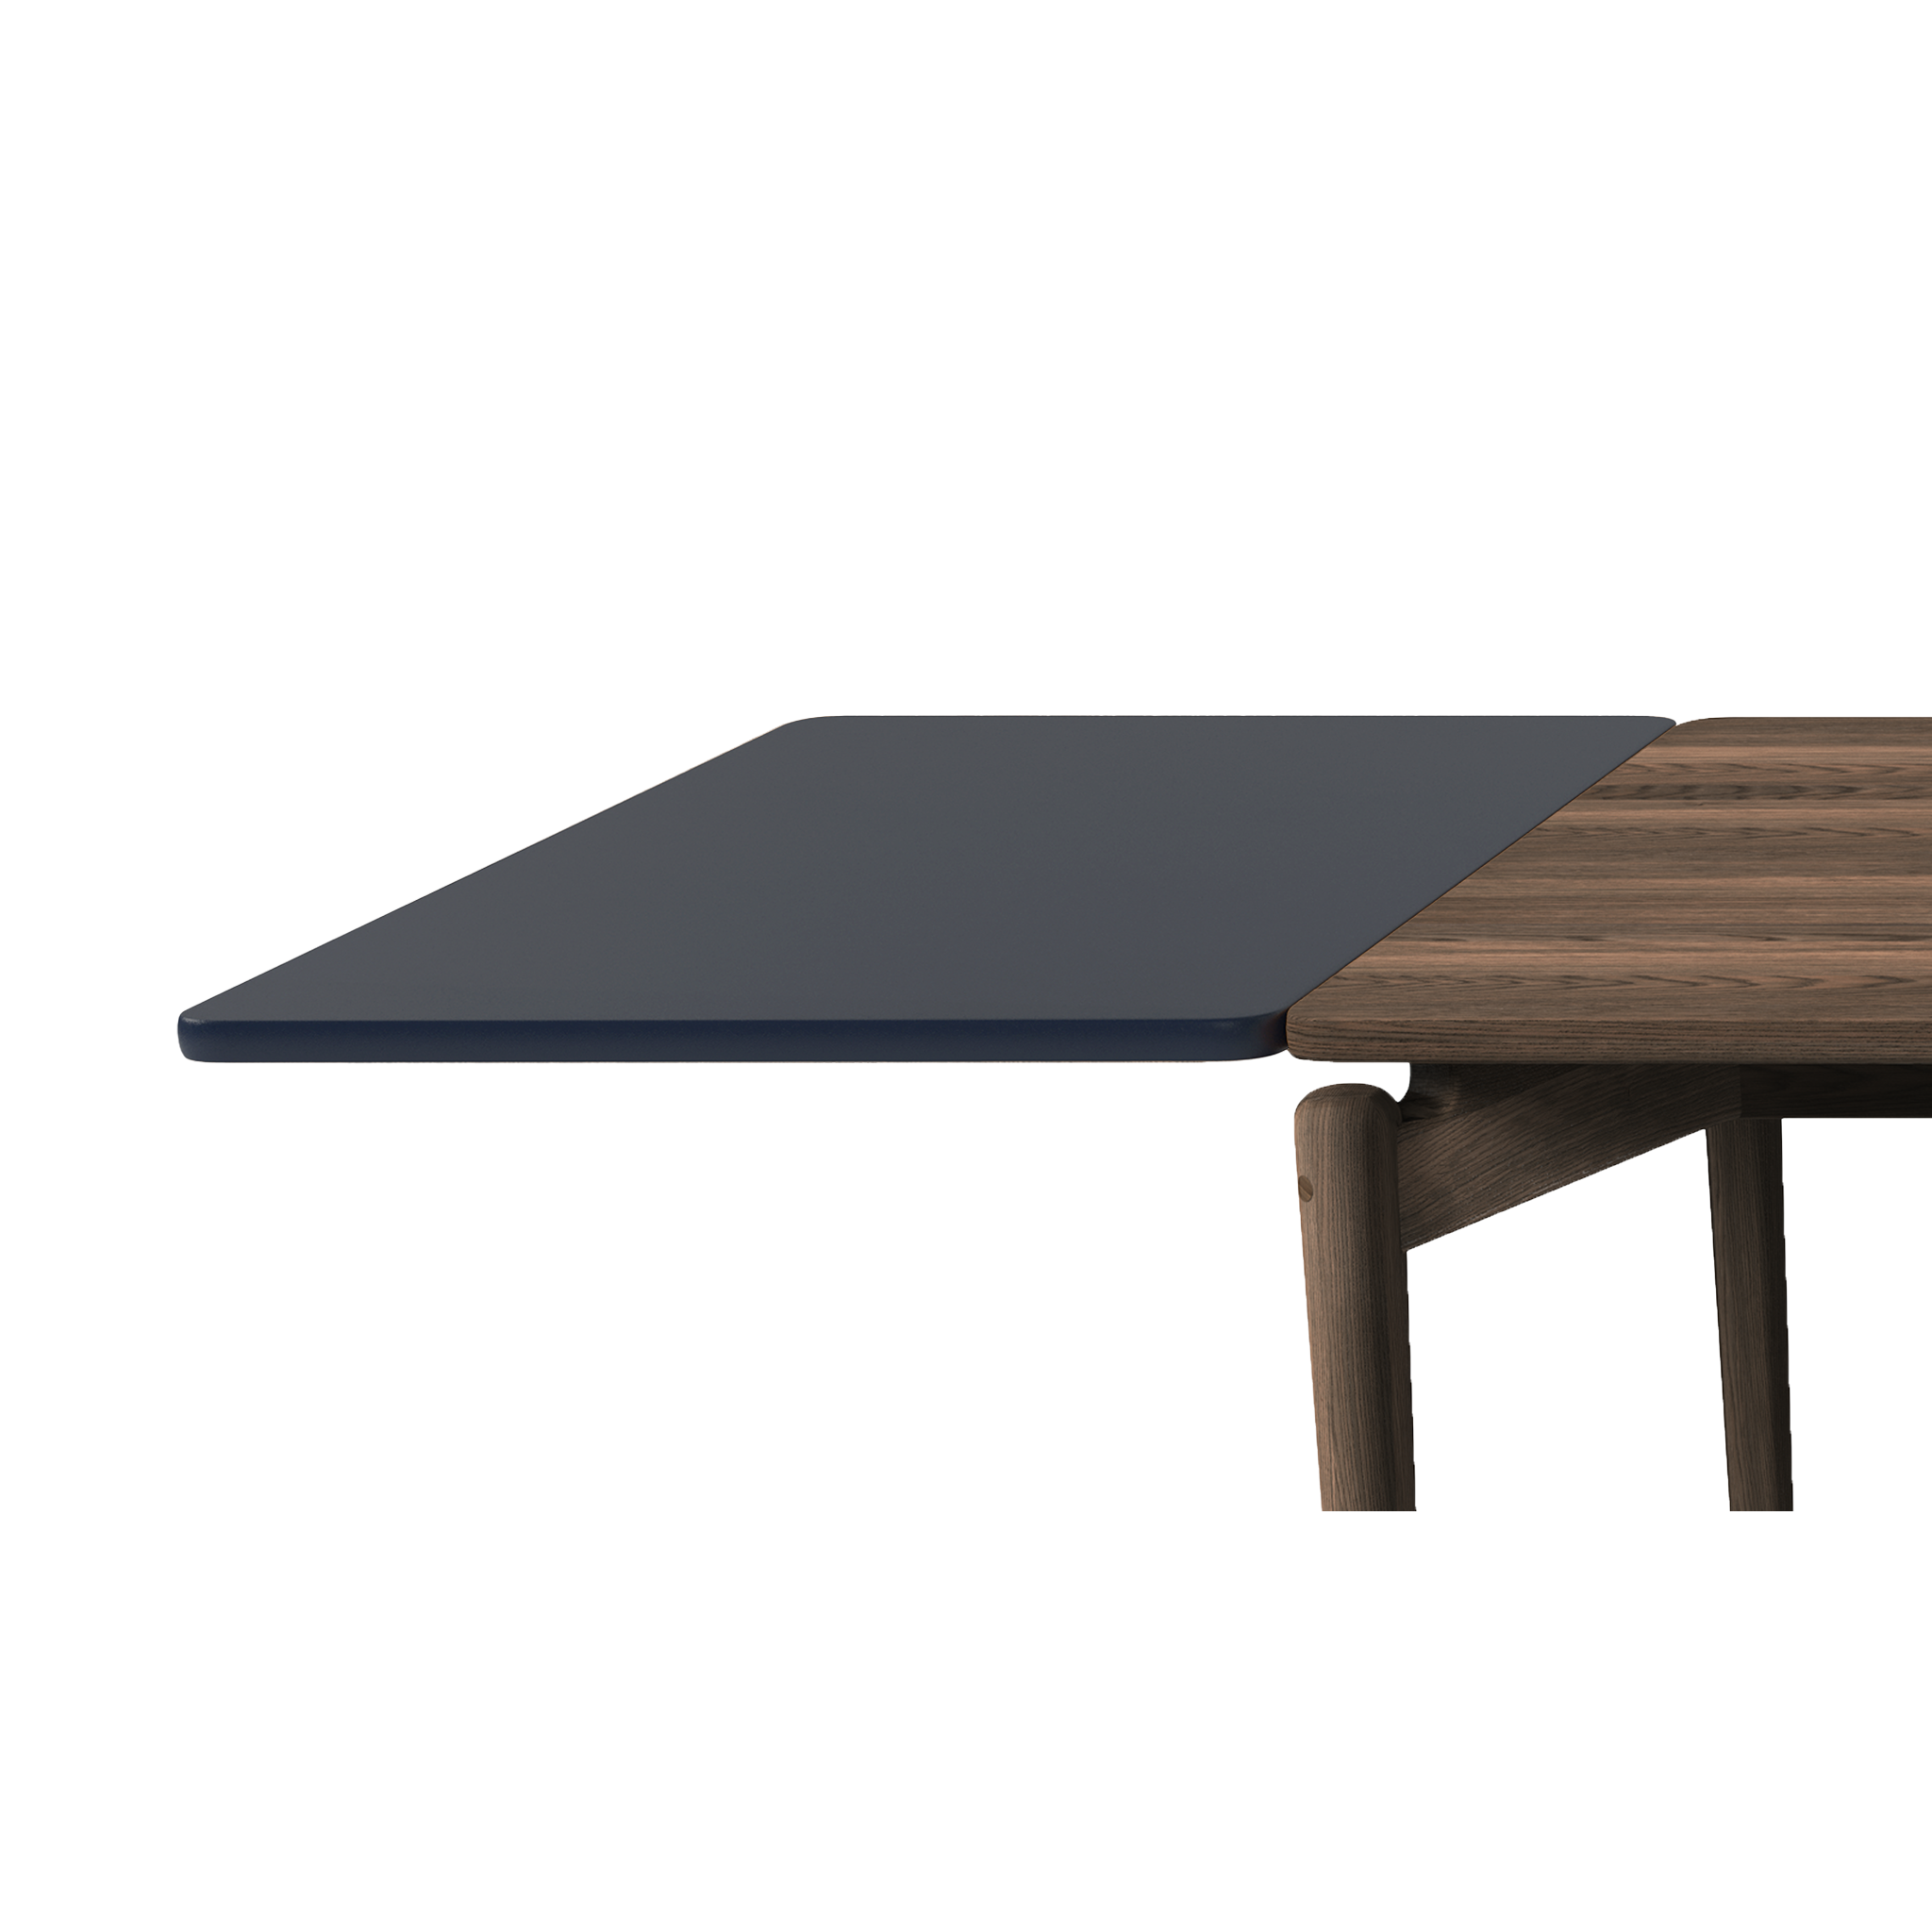 Additional Plate for PURE Dining Table